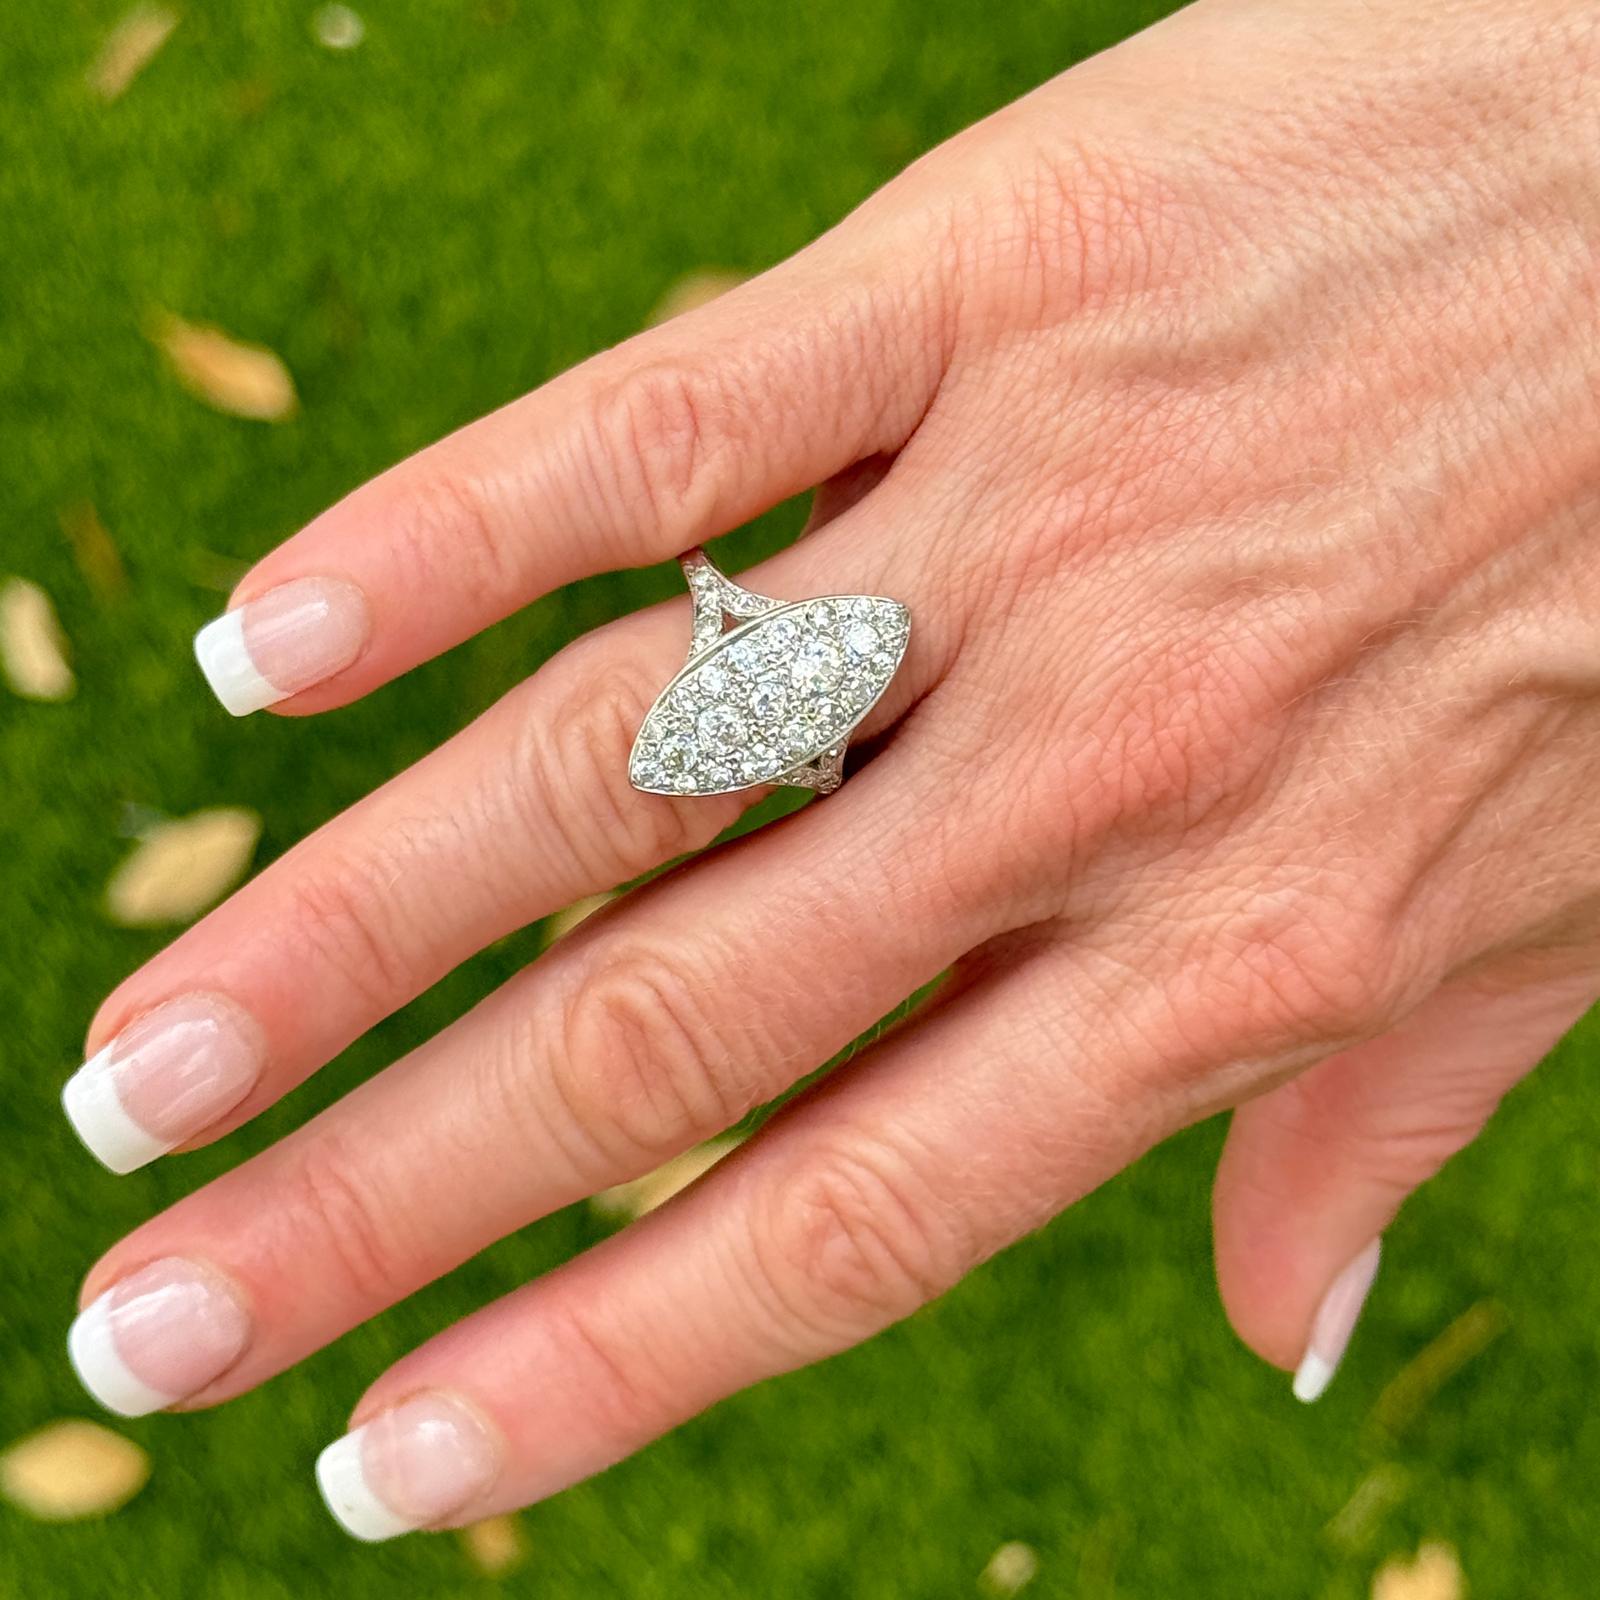 The vintage diamond navette cocktail ring is a stunning example of vintage elegance, showcasing exquisite craftsmanship and timeless design. Crafted in 14 karat white gold, the ring is adorned with 29 old european cut diamonds weighing approximately